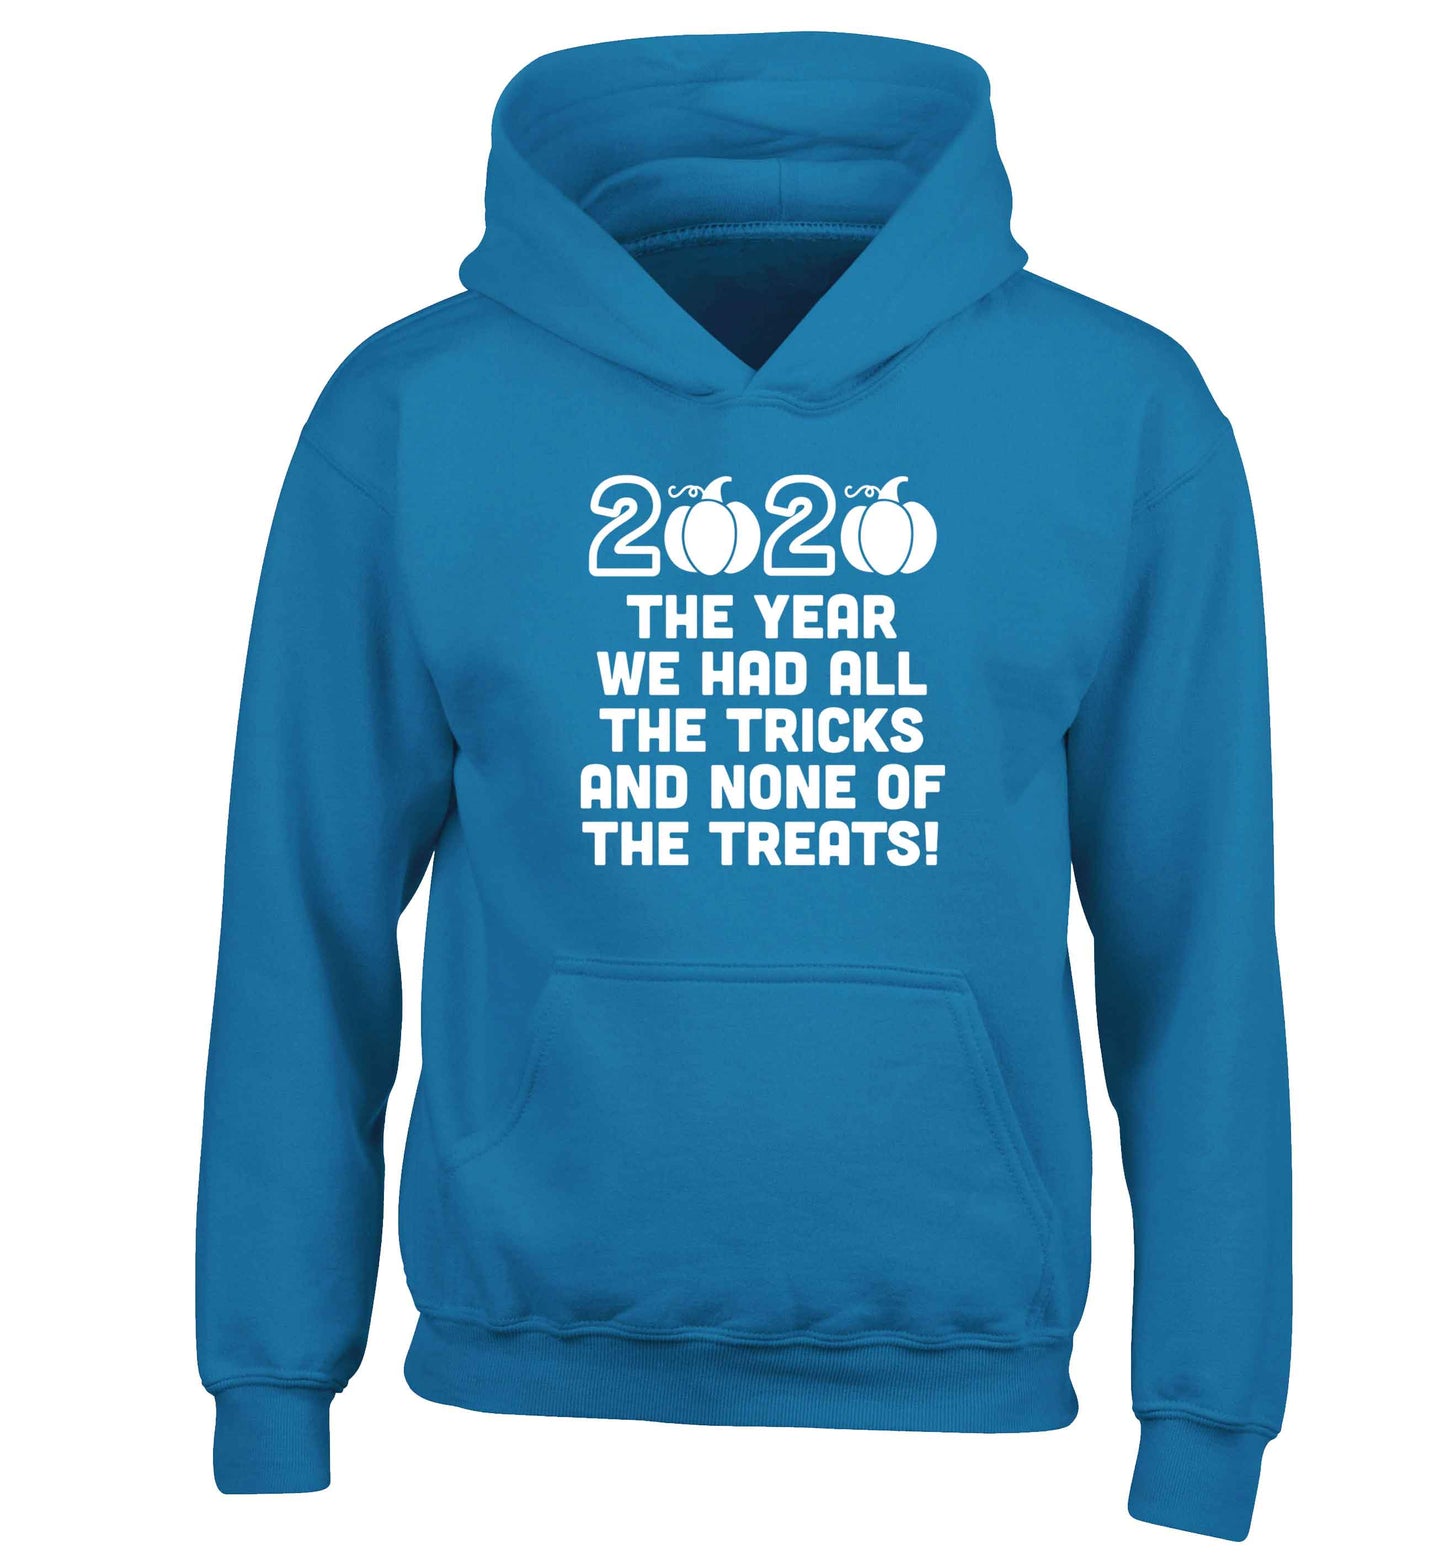 2020 The year we had all of the tricks and none of the treats children's blue hoodie 12-13 Years